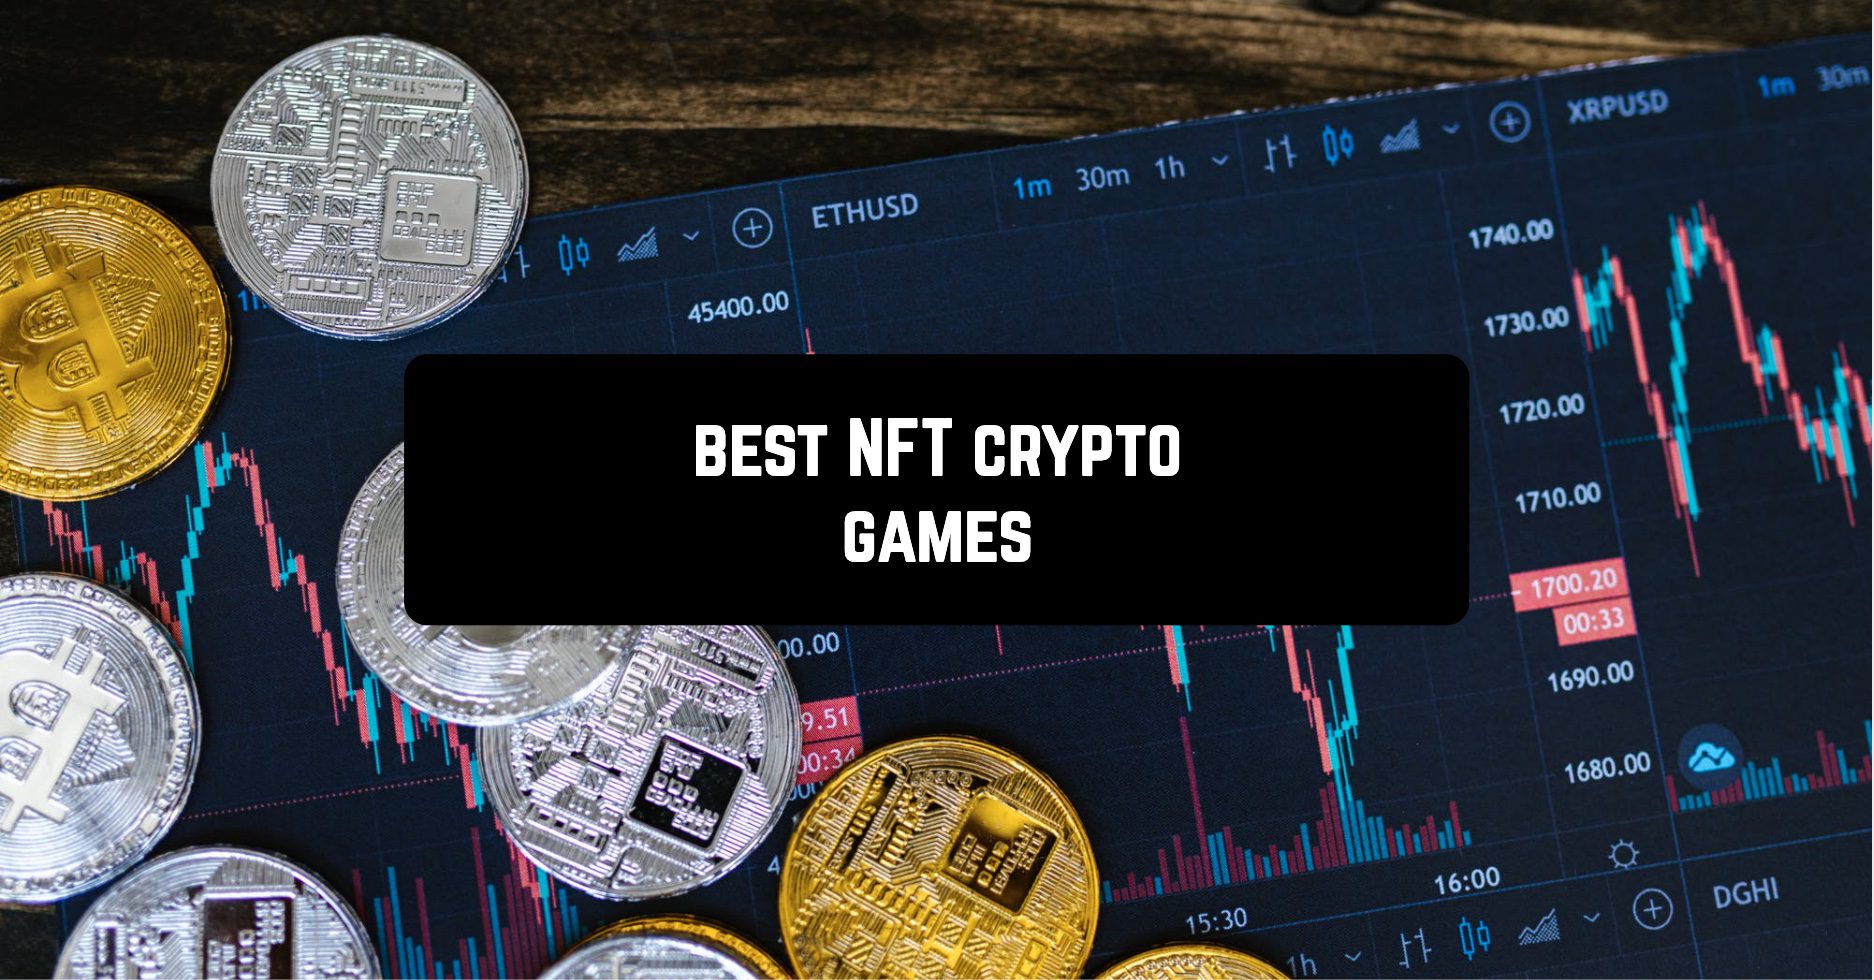 Best NFT crypto games